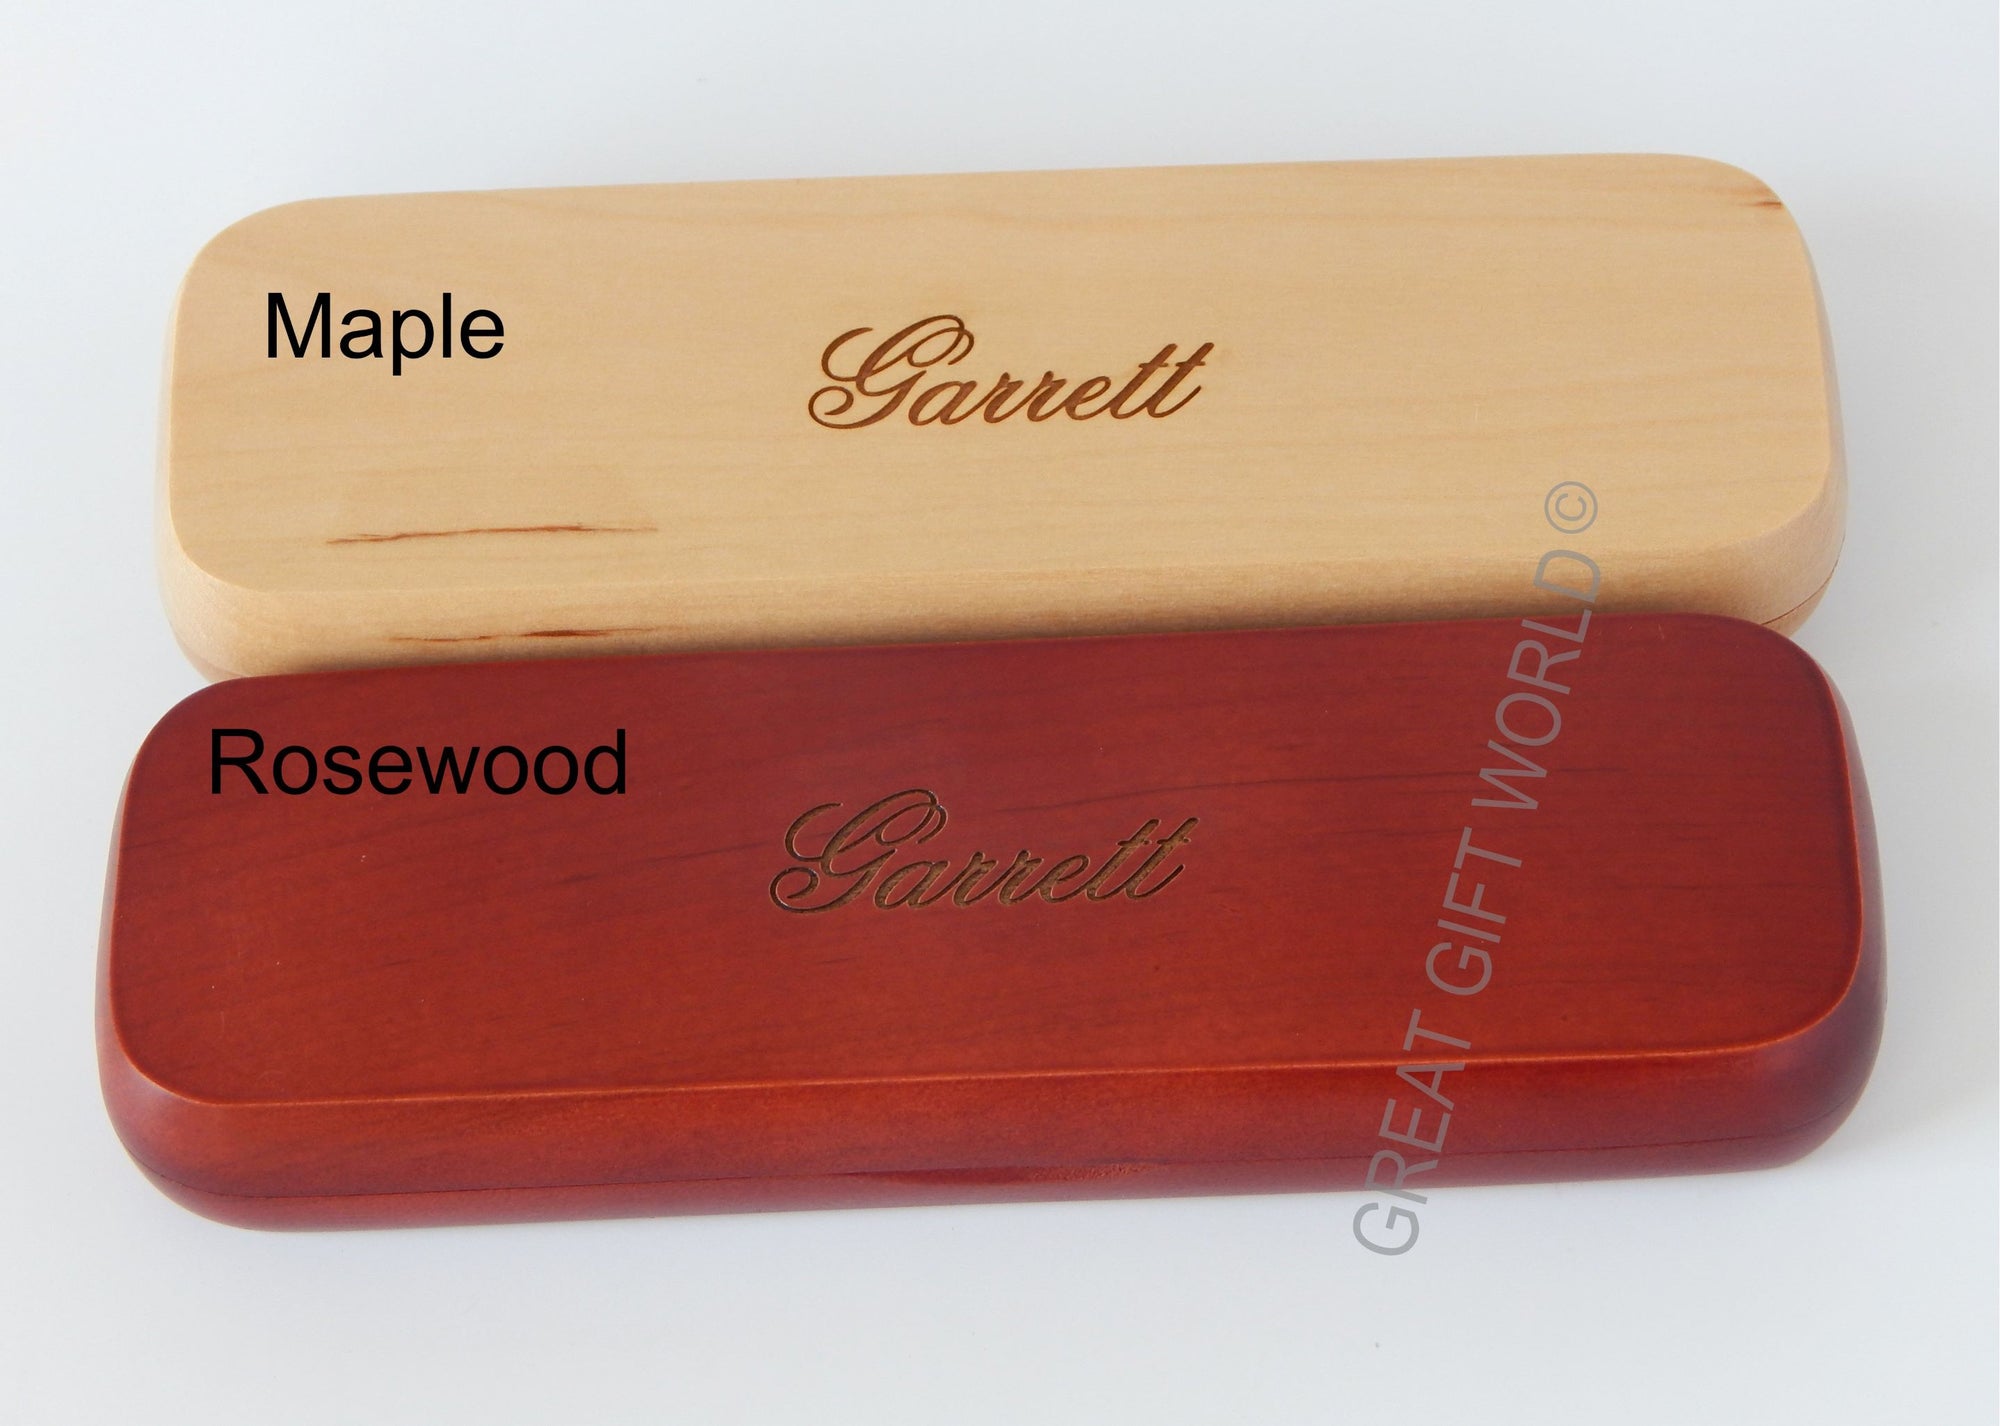 Father of the Bride Gift from Groom | Father In Law Wedding Wood Pen